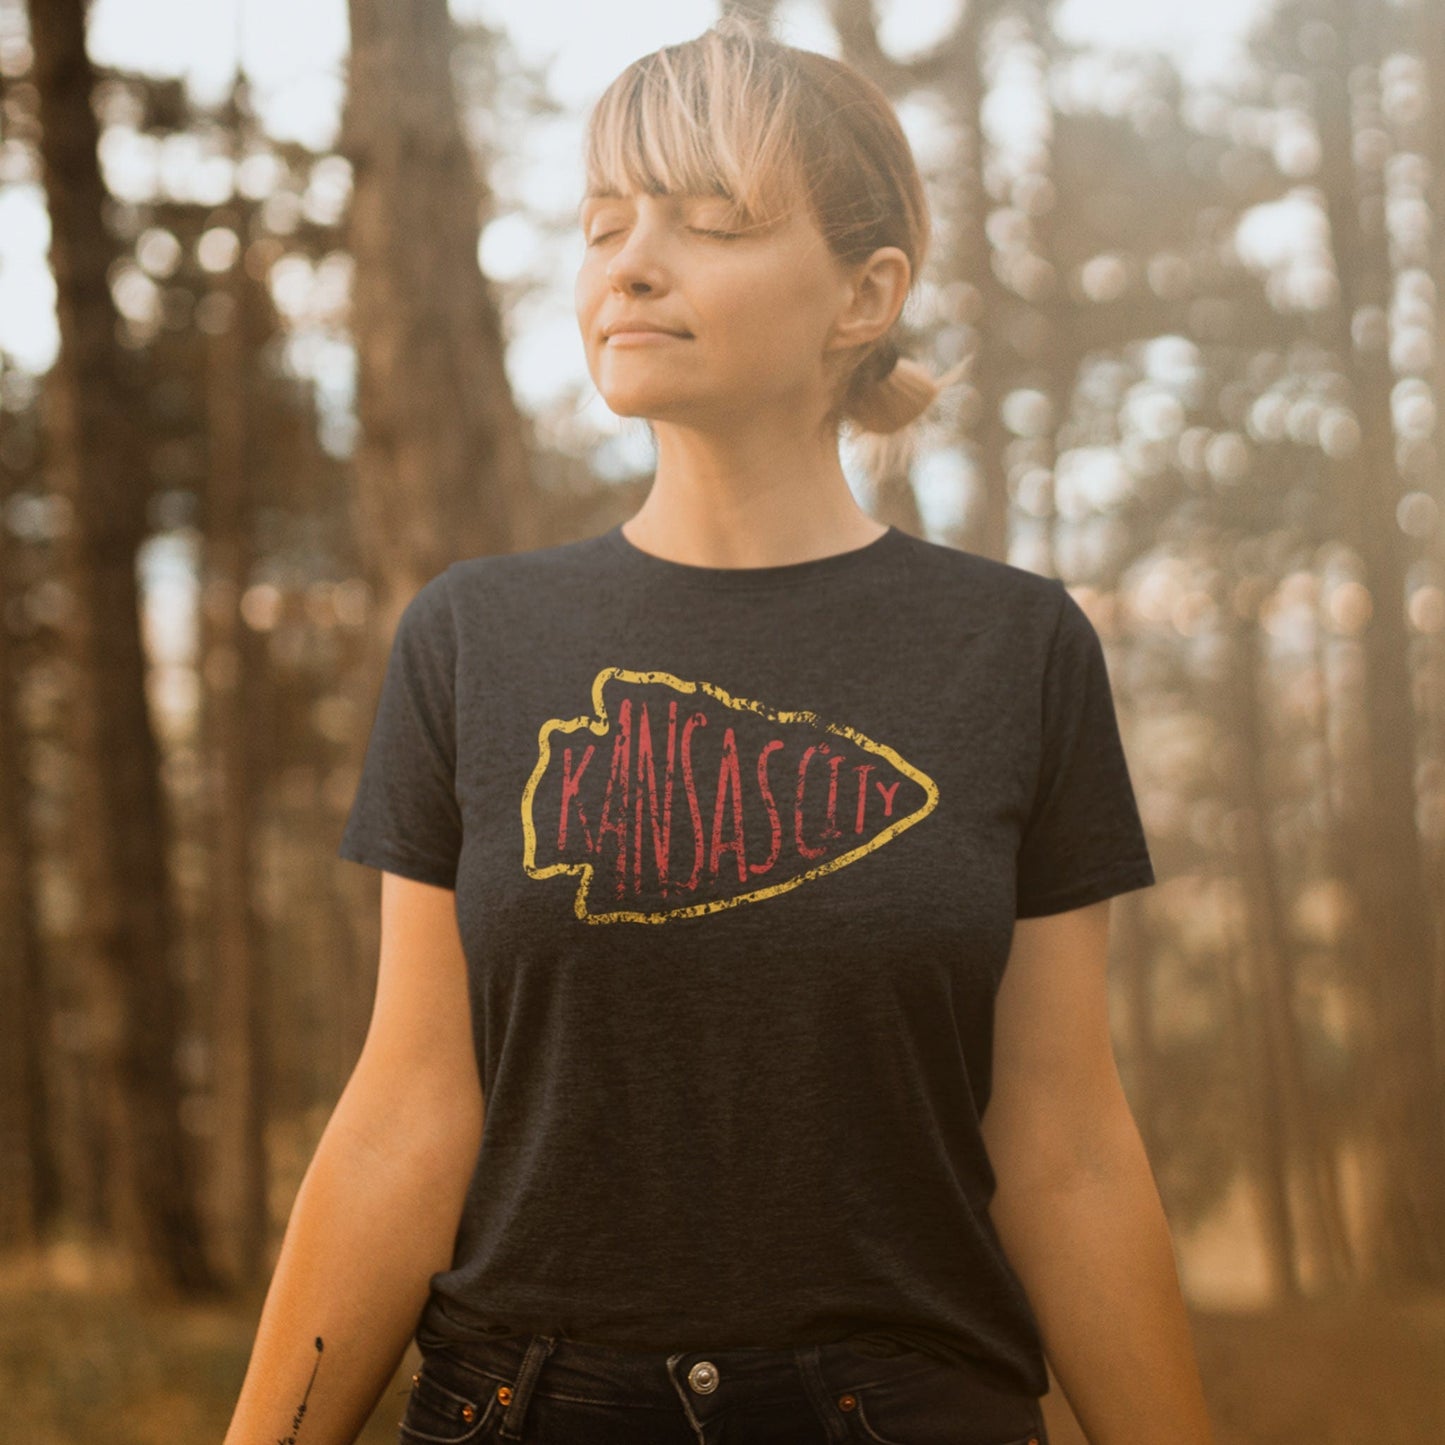 KC Swag Kansas City Chiefs red KANSA CITY inside yellow arrowhead outline on dark heather grey t-shirt worn by female model in warm forest setting